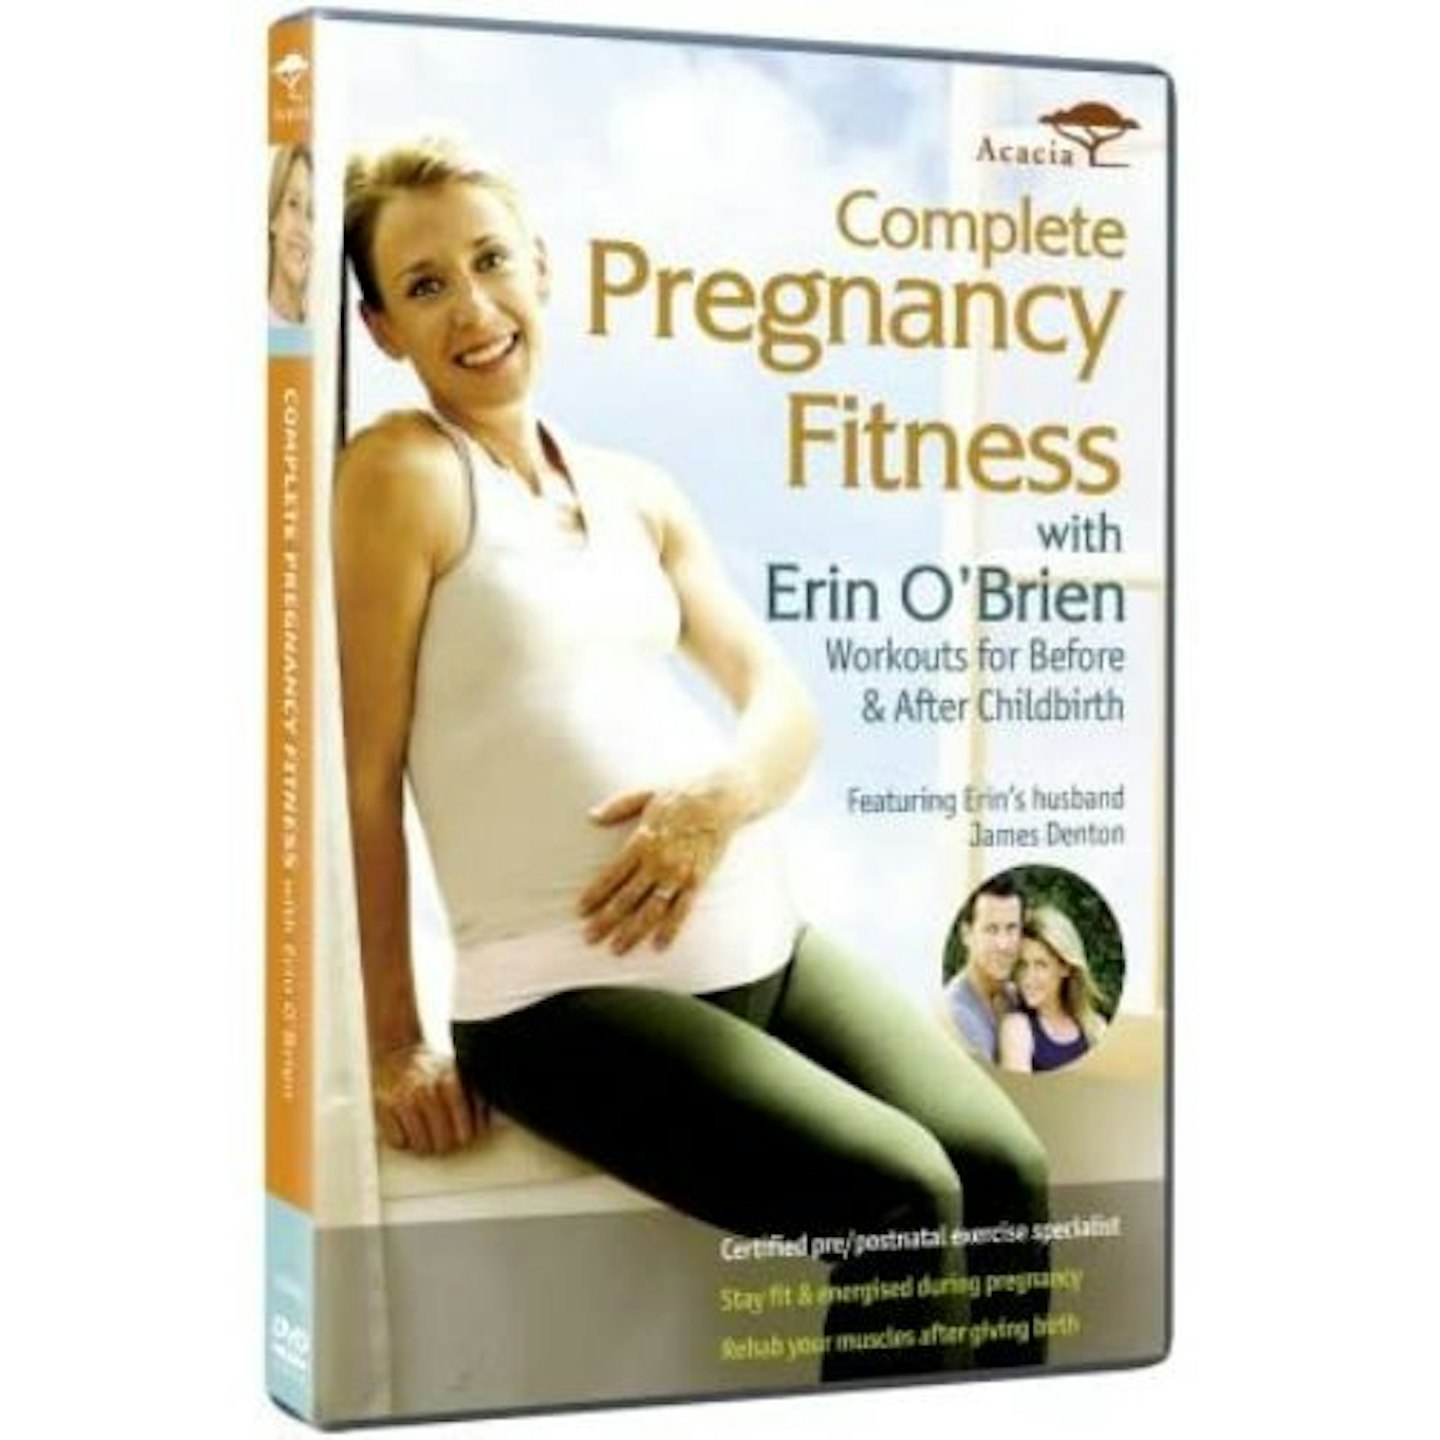 Complete Pregnancy Fitness with Erin O’Brien